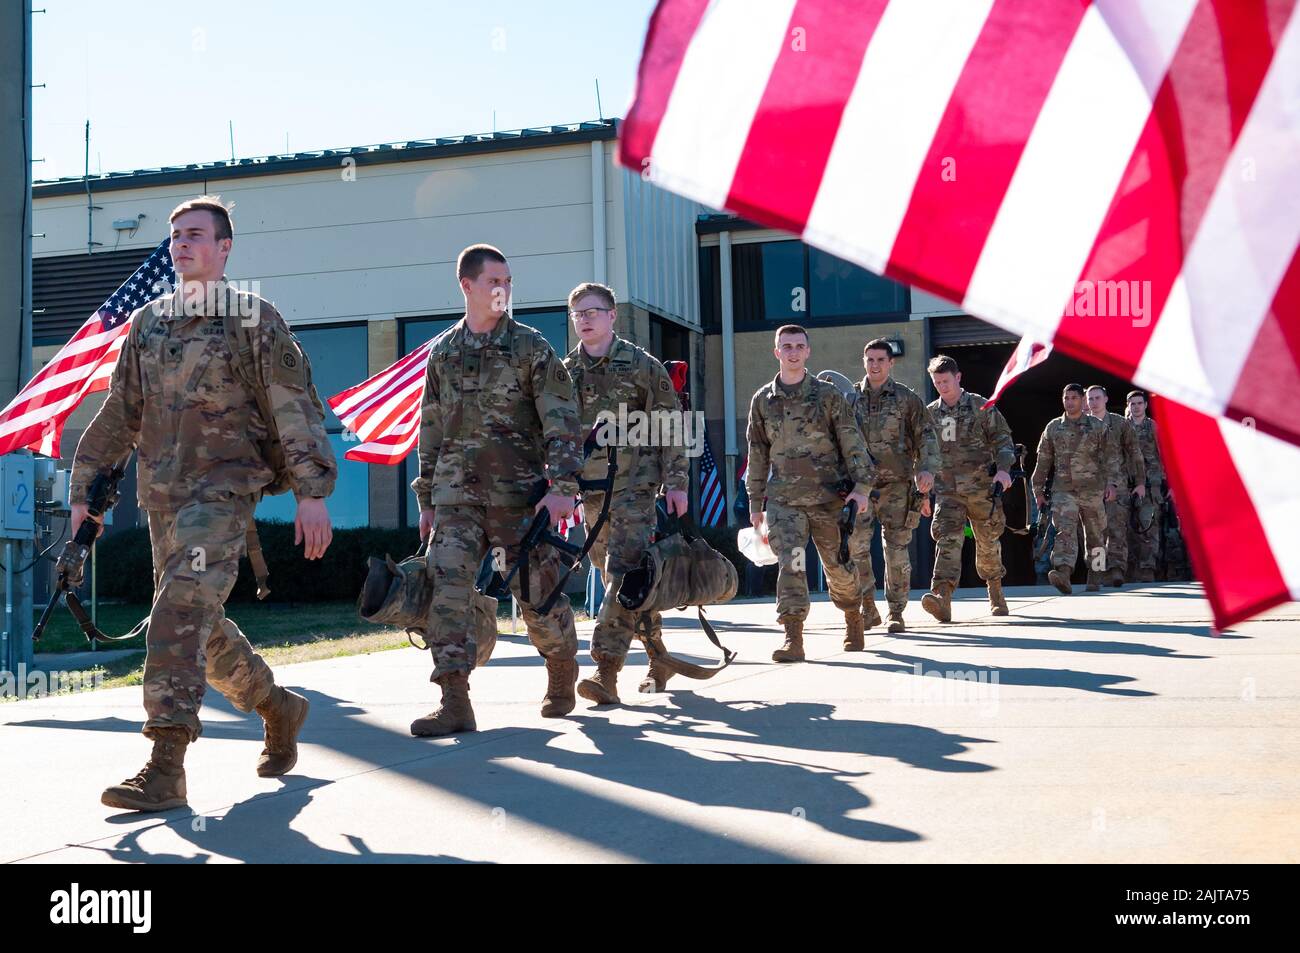 January 5, 2020, Pope Army Airfield, North Carolina, USA: U.S. Army paratroopers from the 1st Brigade Combat Team, 82nd Airborne Division, walk past members of the North Carolina Patriot Guard Riders as the division continues their deployment from Pope Army Airfield. The ''All American Division'' Immediate Response Force (IRF), based at Fort Bragg, N.C., mobilized for deployment to the U.S. Central Command area of operations in response to increased threat levels against U.S. personnel and facilities following the Jan. 2 U.S. drone strike in Baghdad, Iraq that killed Qasem Soleimani, the head Stock Photo